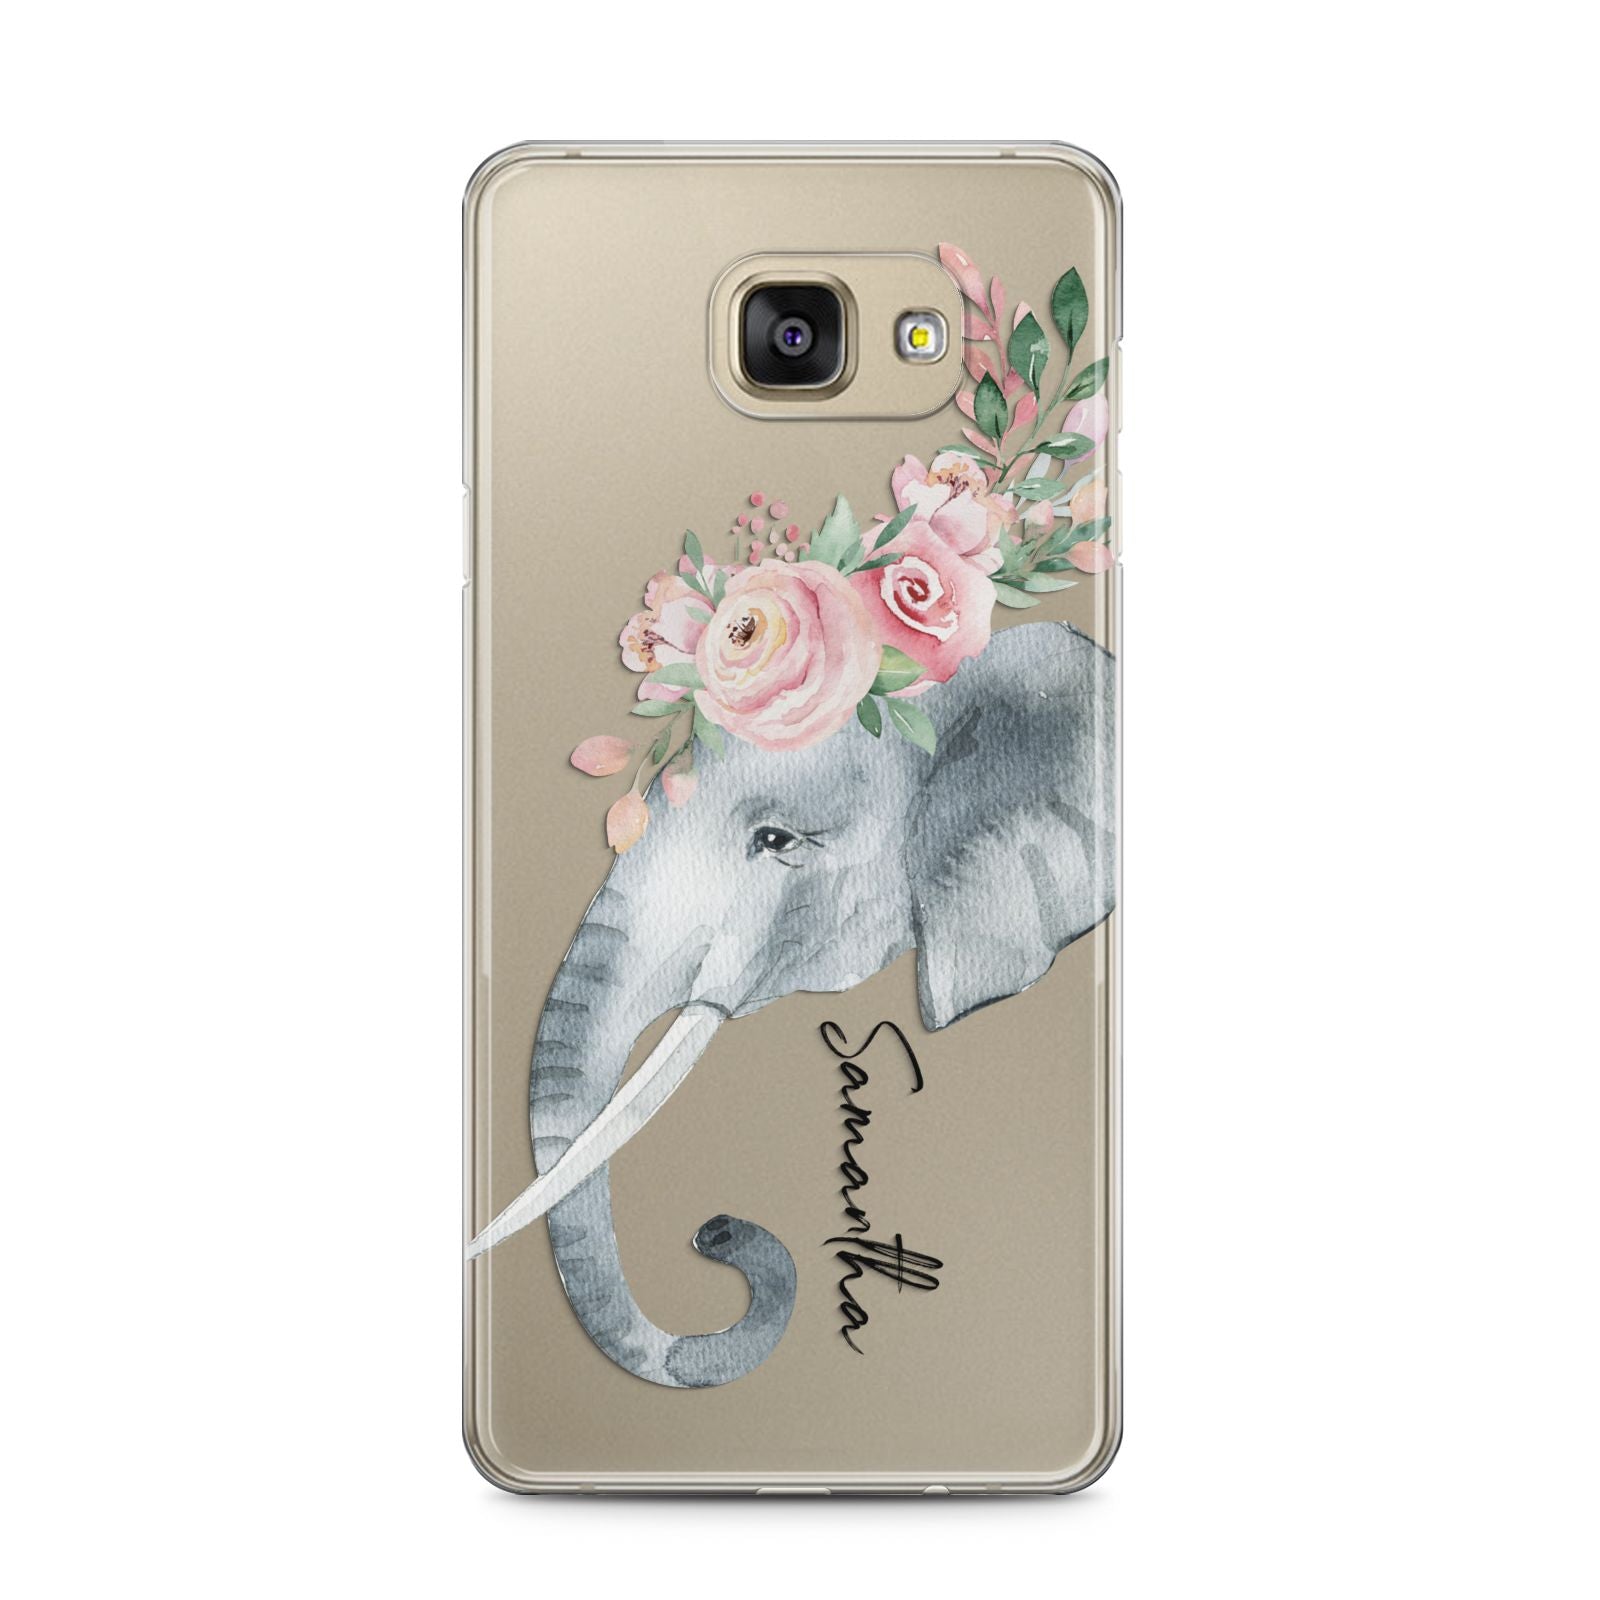 Personalised Elephant Samsung Galaxy A5 2016 Case on gold phone